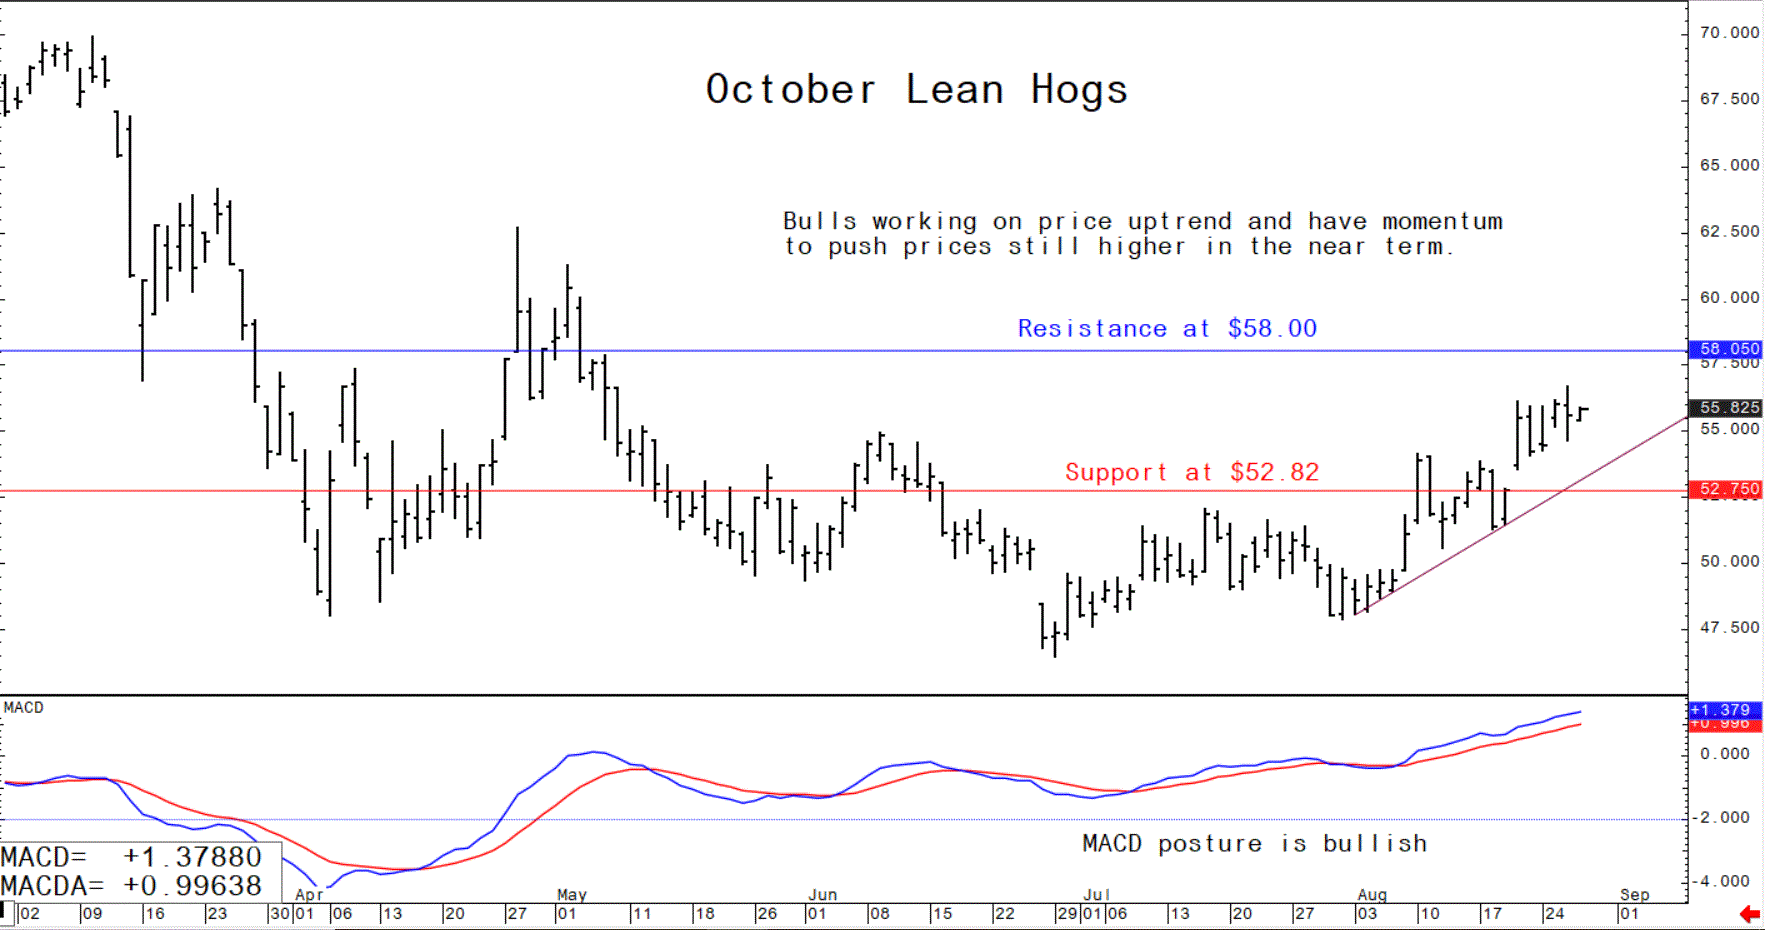 Bulls working on price uptrend and have momentum to push prices still higher in the near term